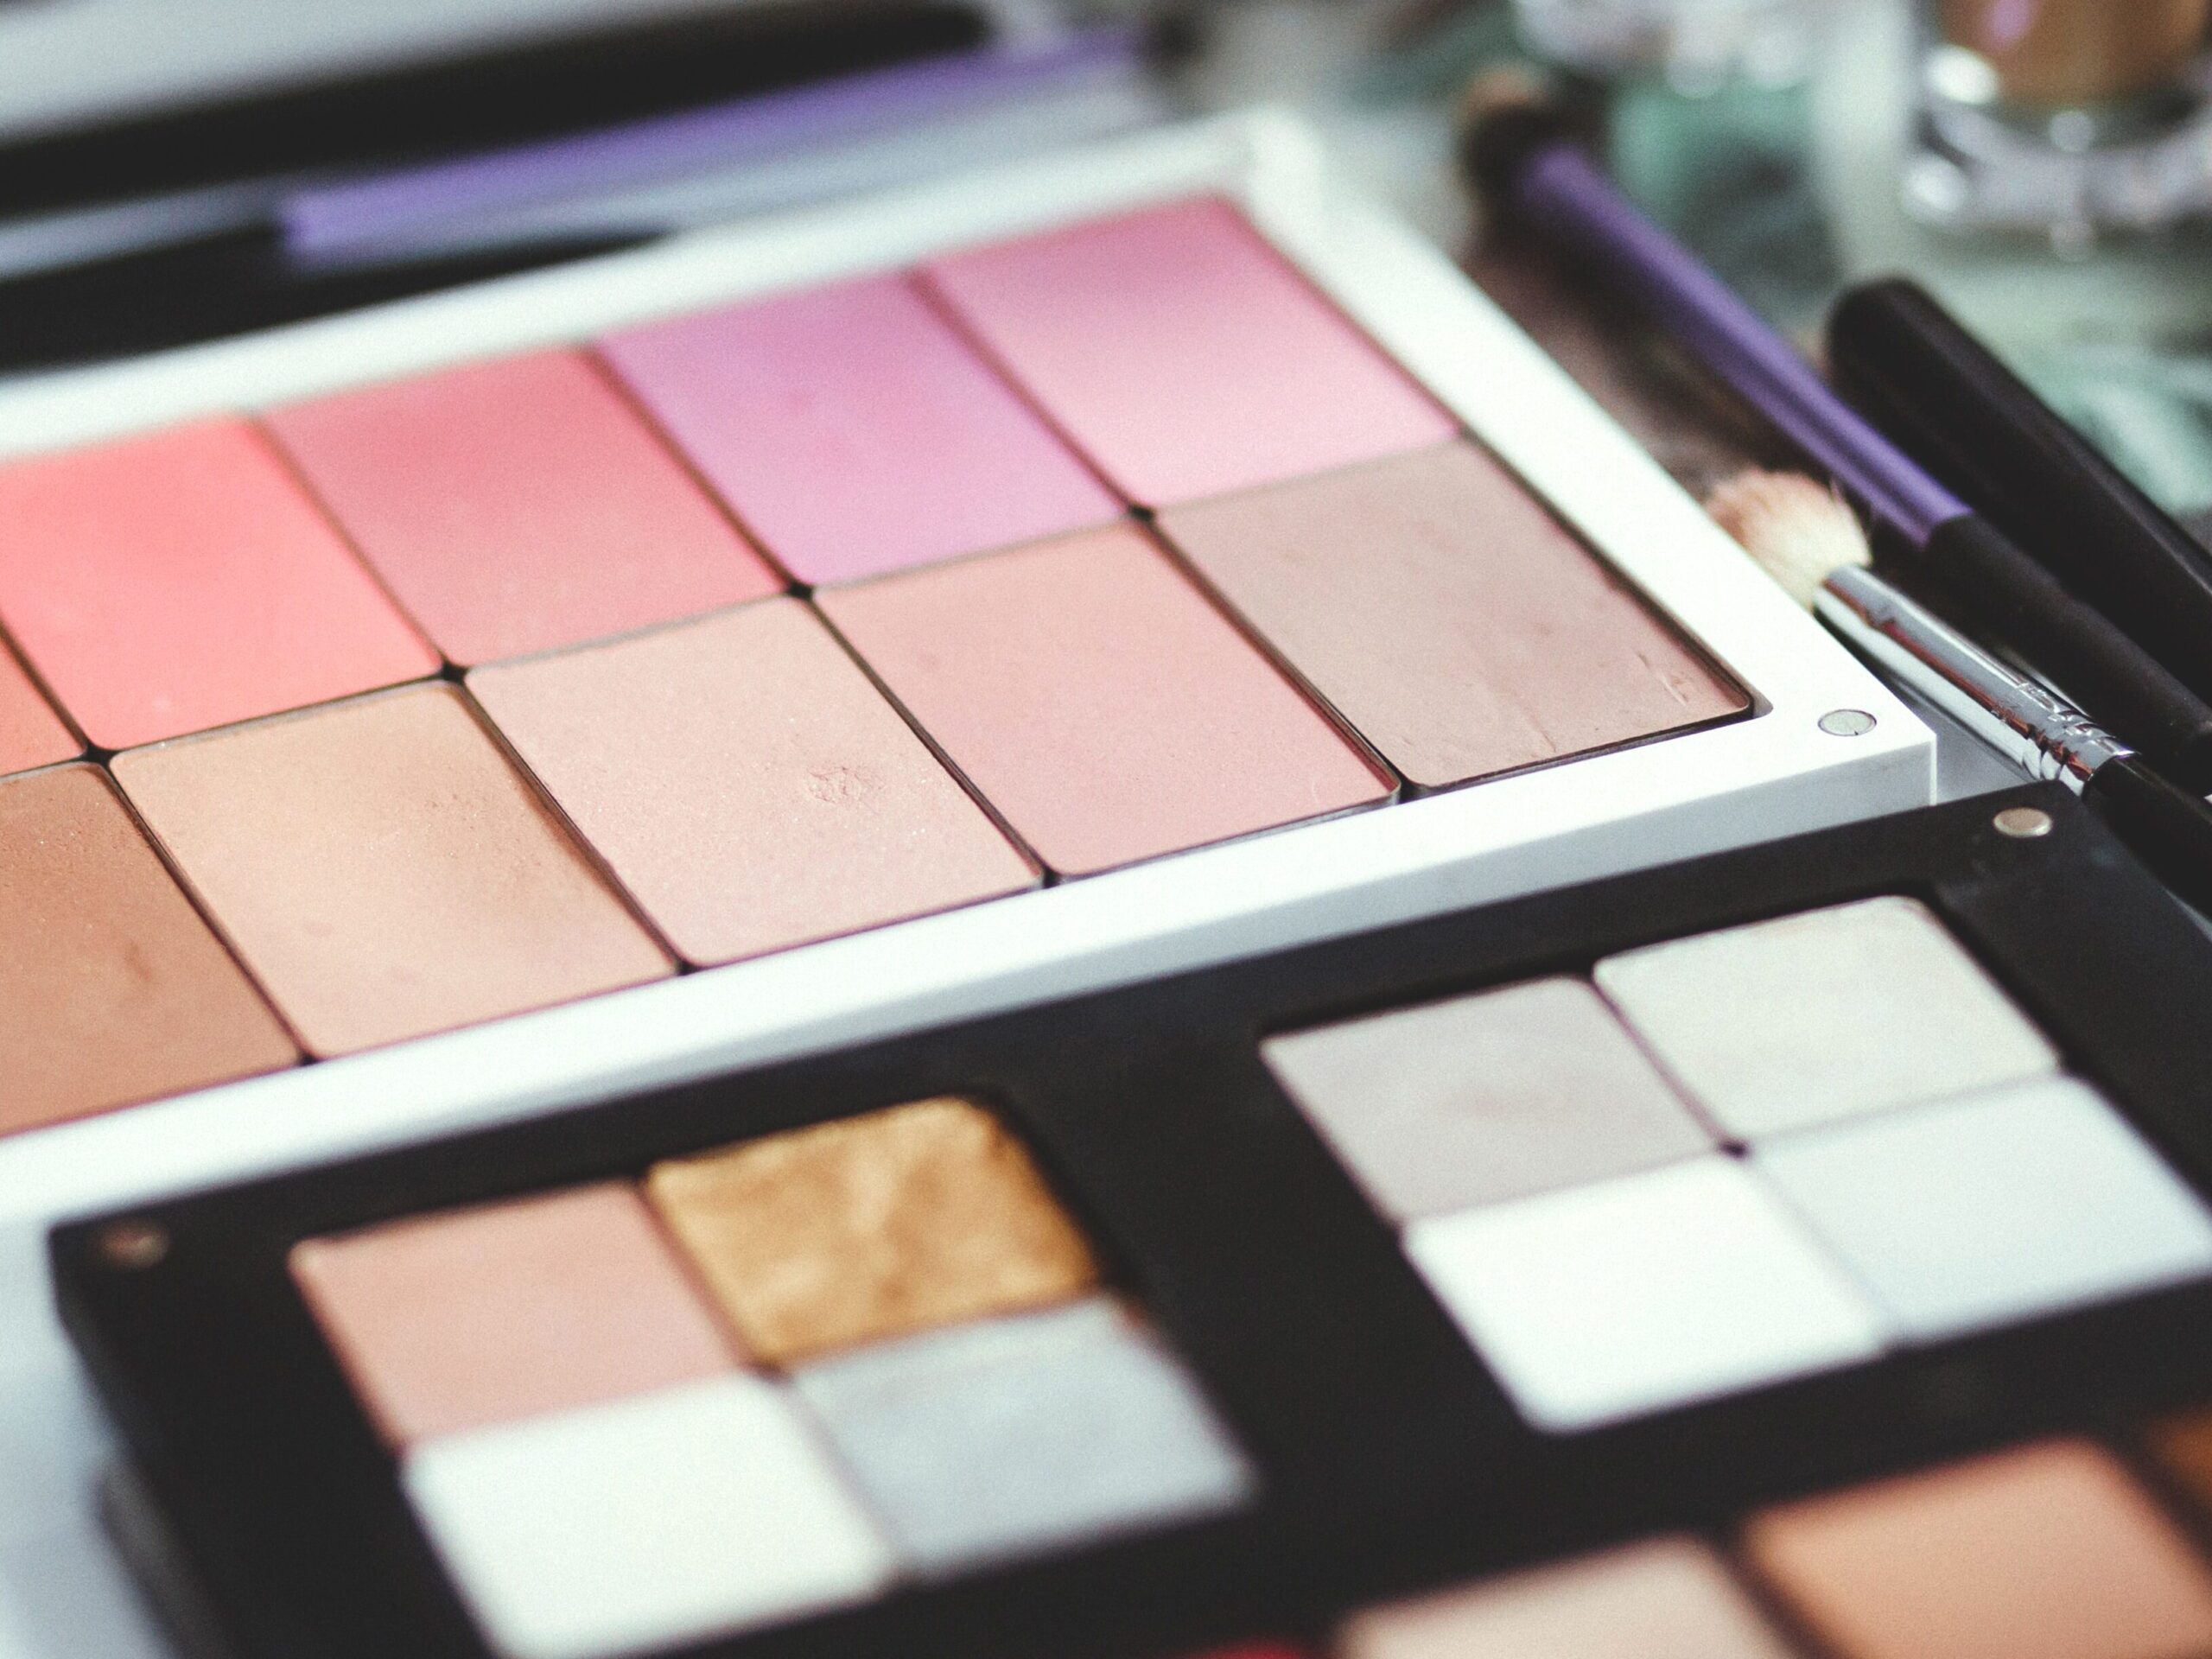 Toxic Beauty Standards. Does Low Self-Confidence Drive Increased Beauty Purchases? 